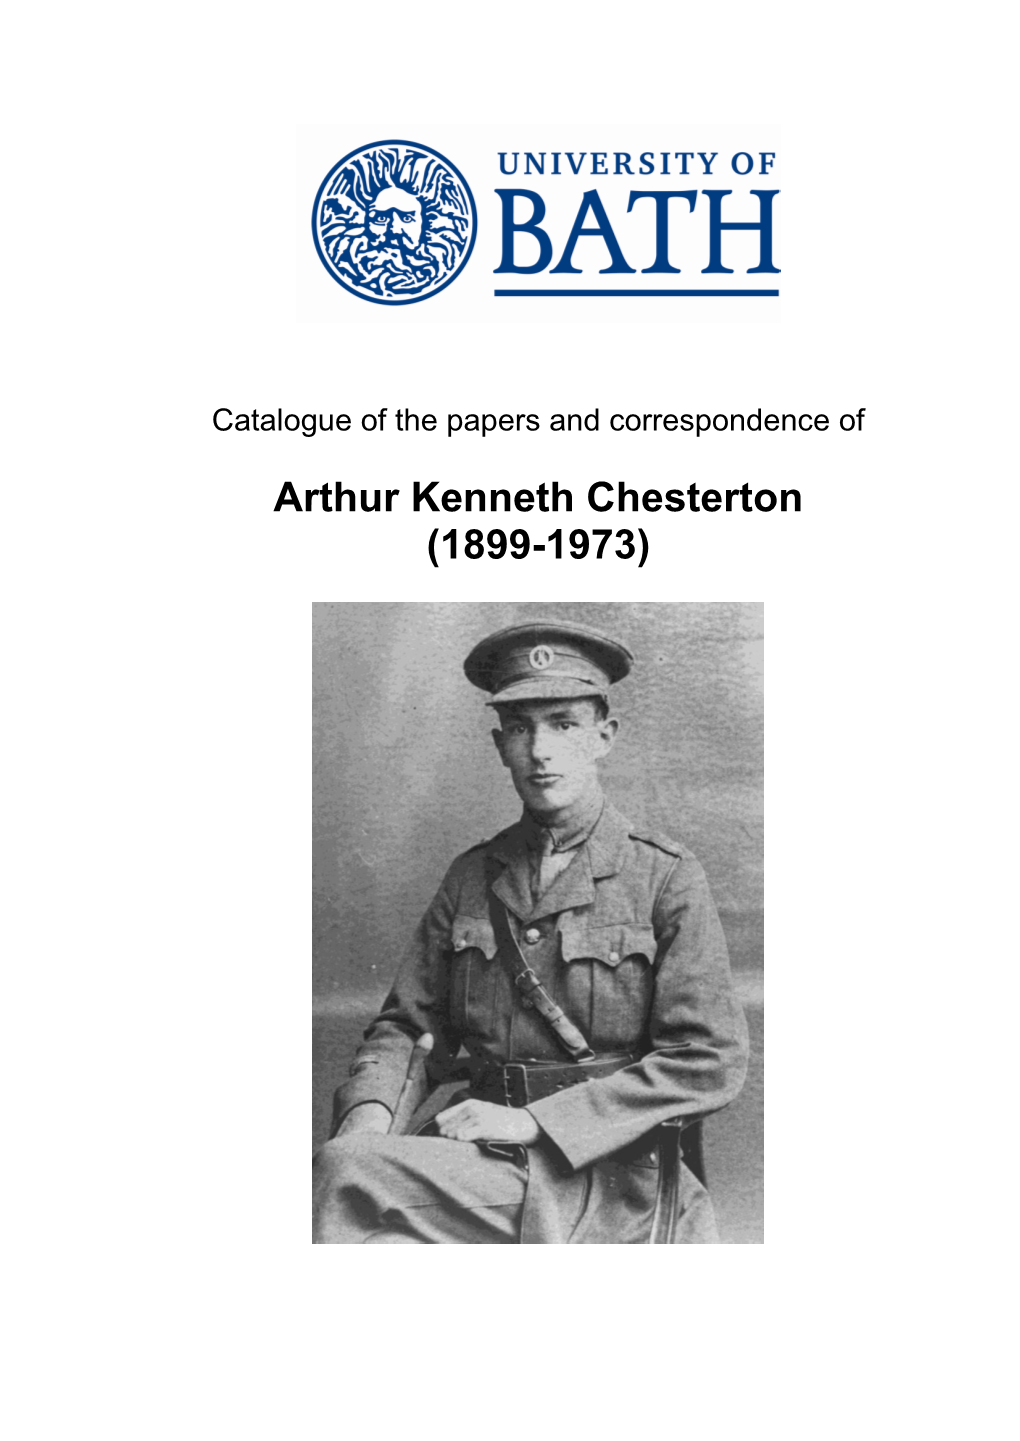 Catalogue of the Papers and Correspondence of Arthur Kenneth Chesterton (1899-1973), Critic, Journalist and Political Activist